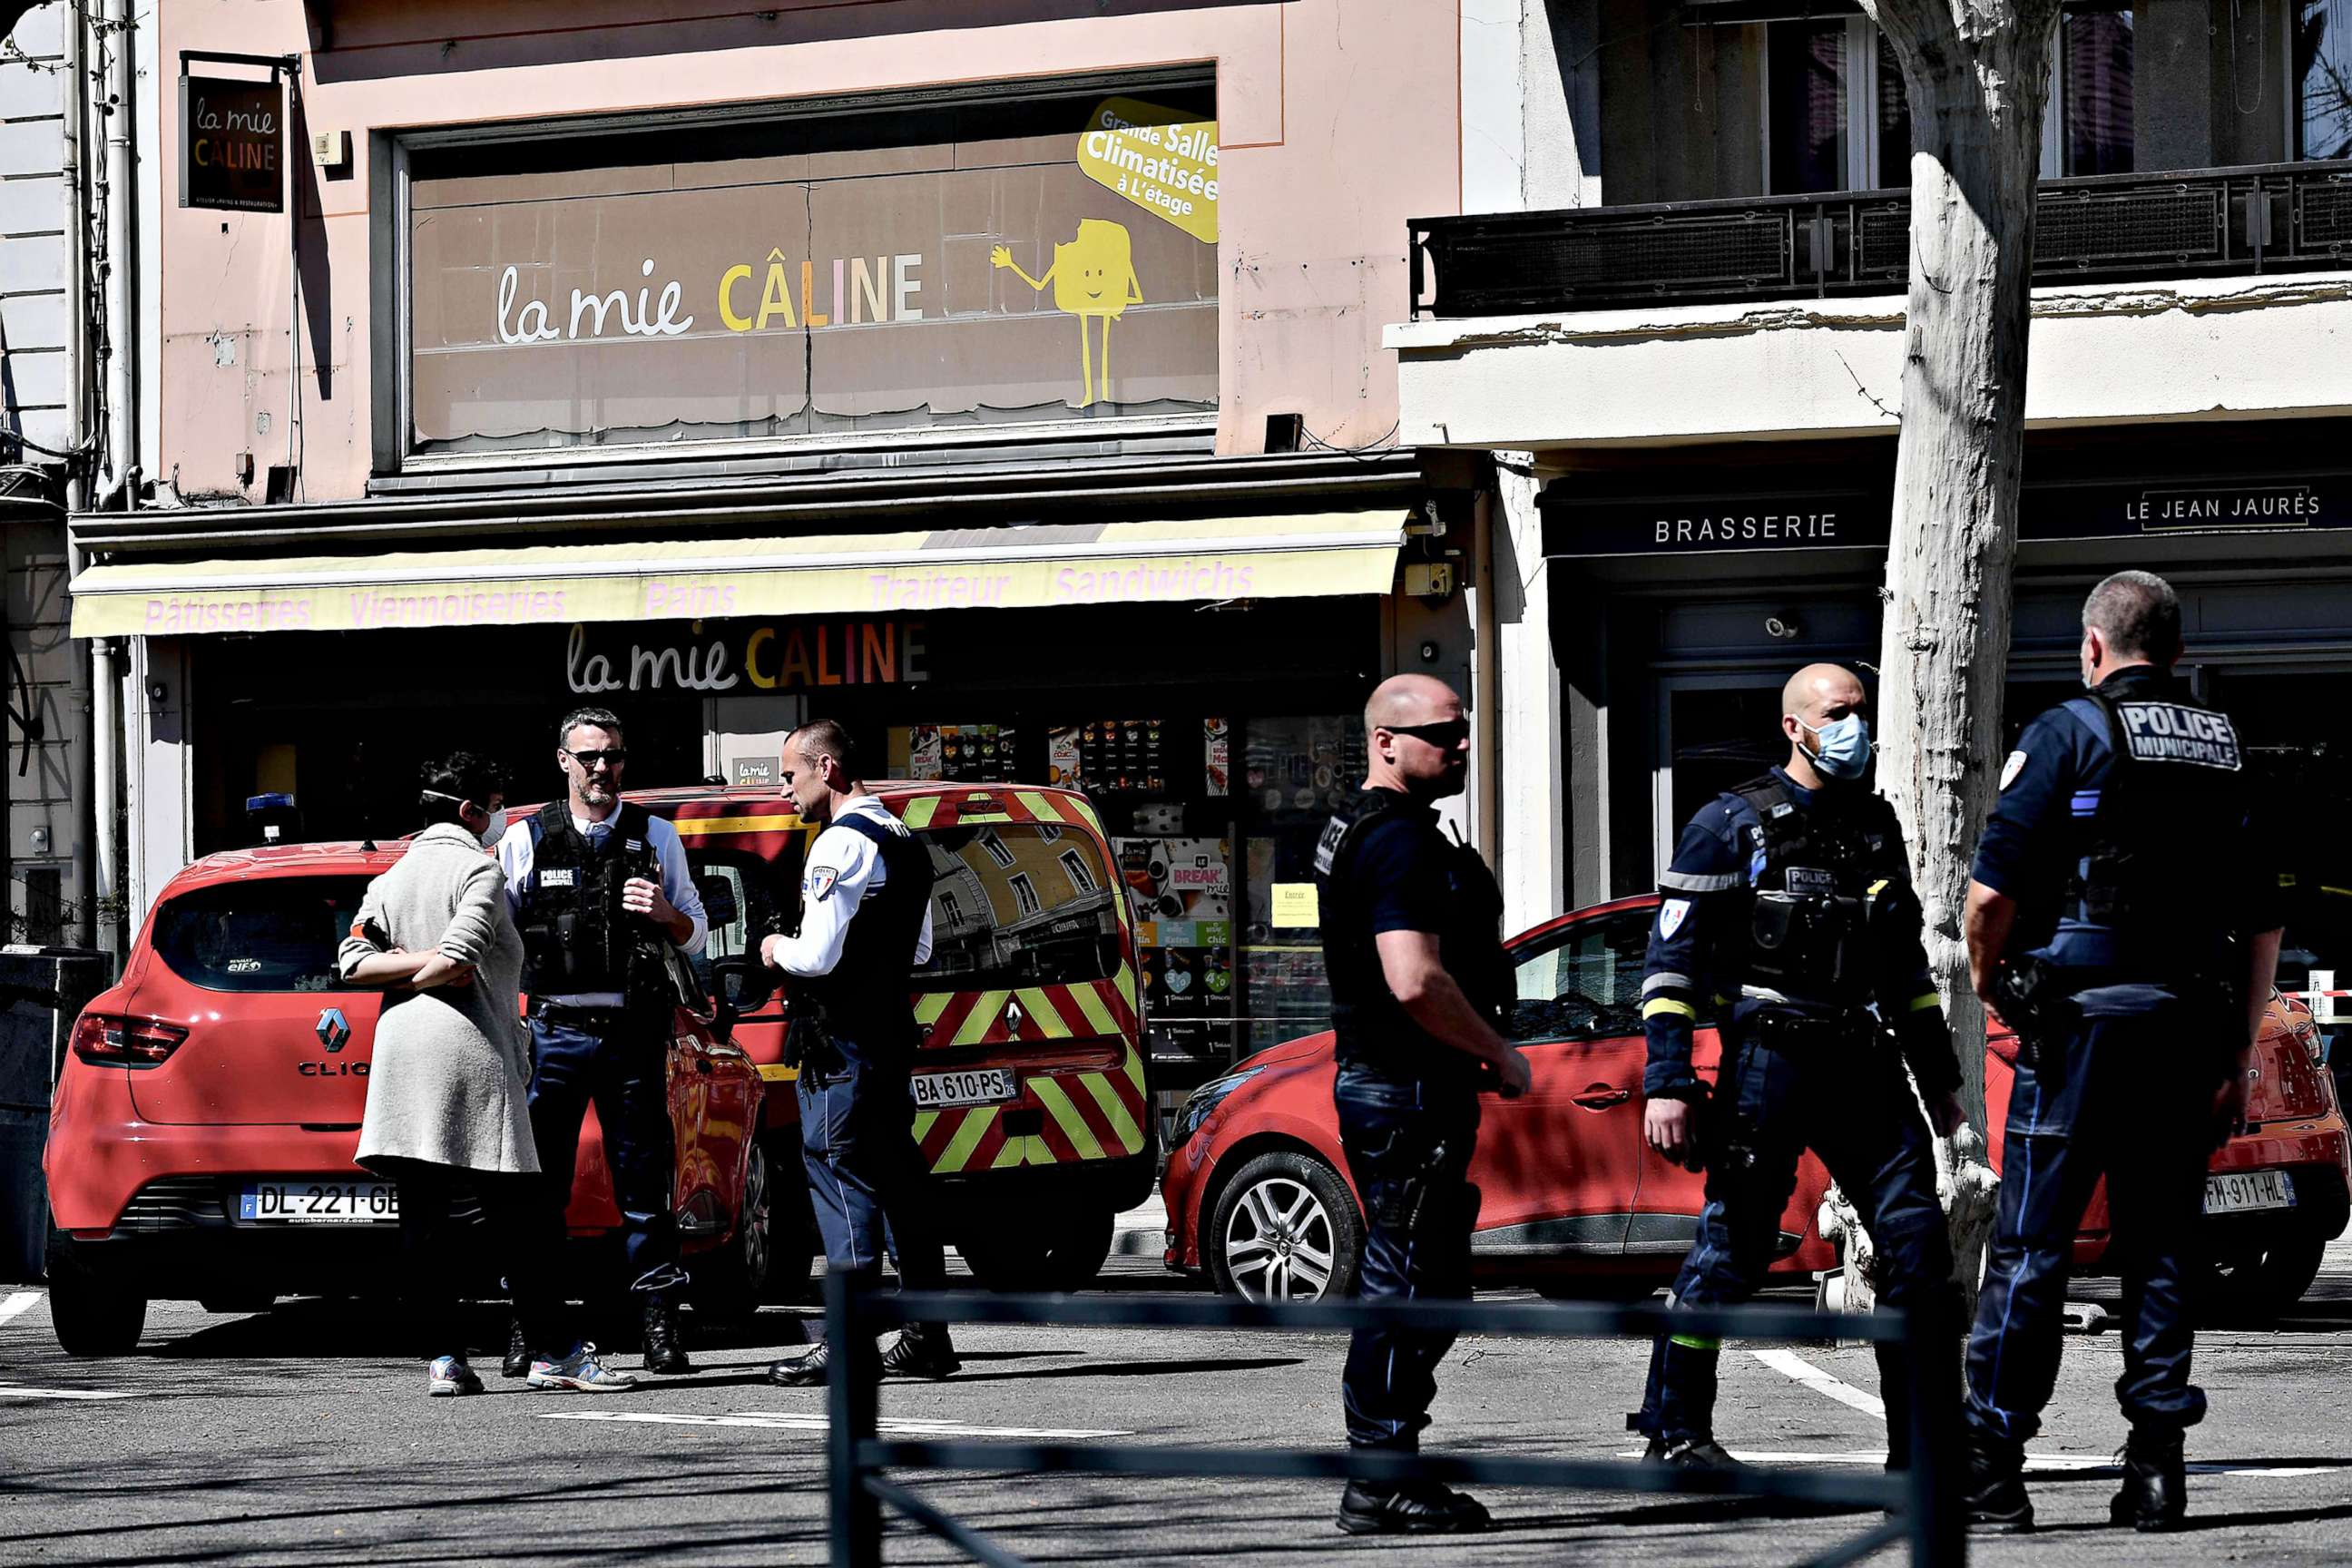 PHOTO: Police officers stand in a street in the center of Romans-sur-Isere, France, on April 4, 2020, after a man attacked several people with a knife, killing two and injuring seven before being arrested, according to sources close to the investigation.